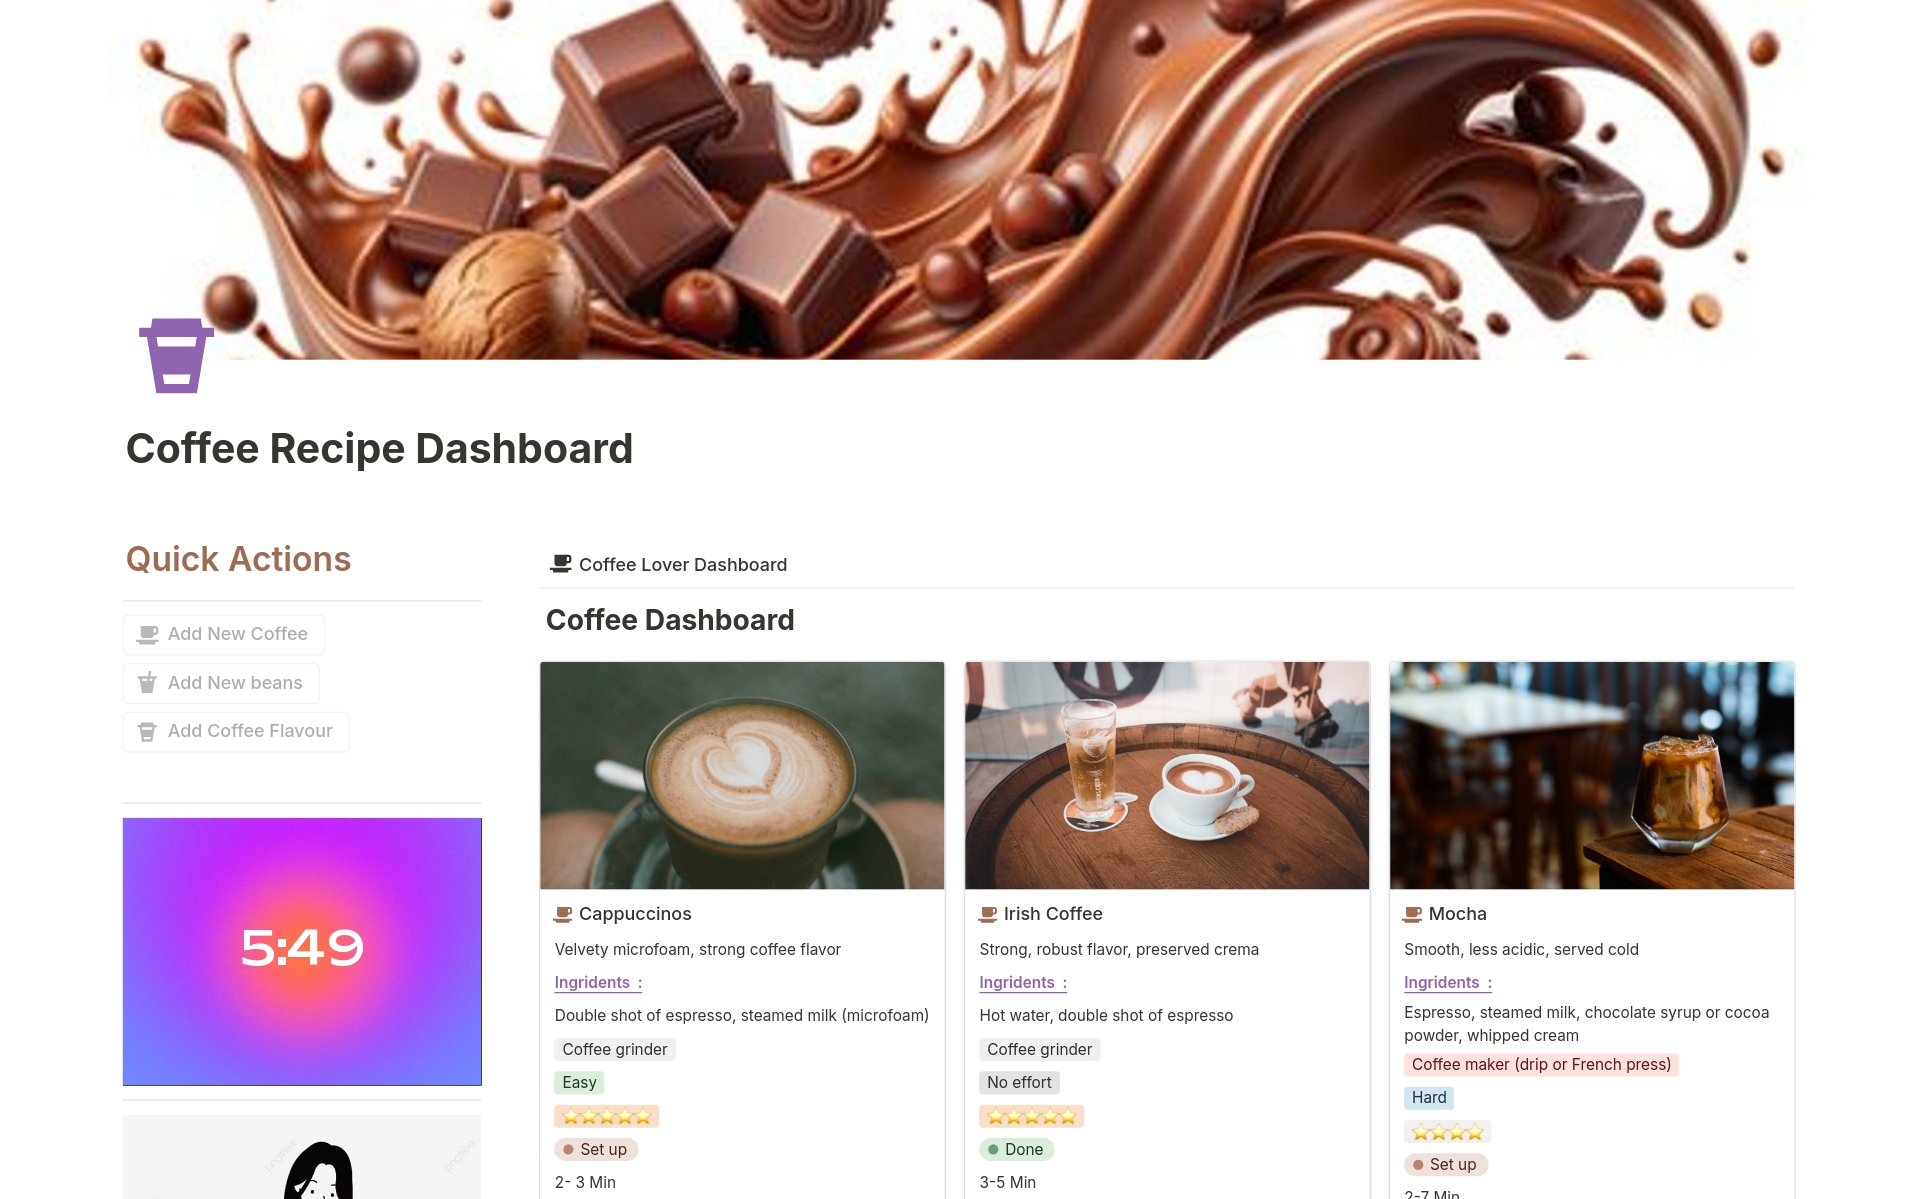 Notion dashboard is designed to help you explore and enjoy the world of coffee like never before.